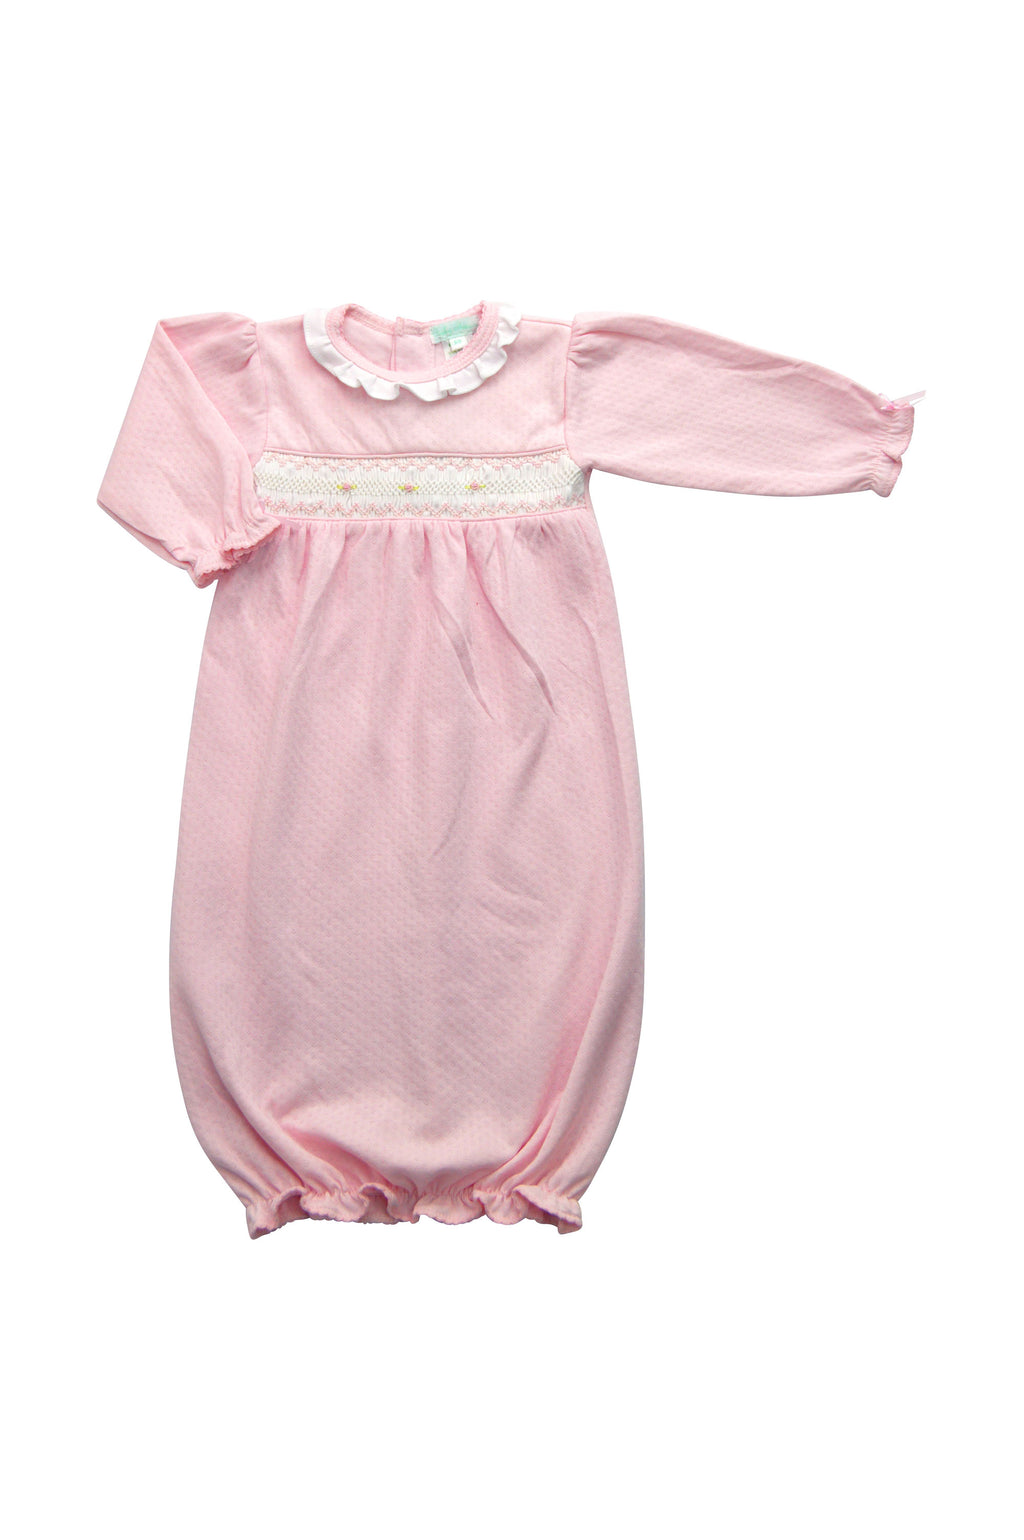 Baby Girl's Pink Jacquard Hand Smocked Daygown - Little Threads Inc. Children's Clothing